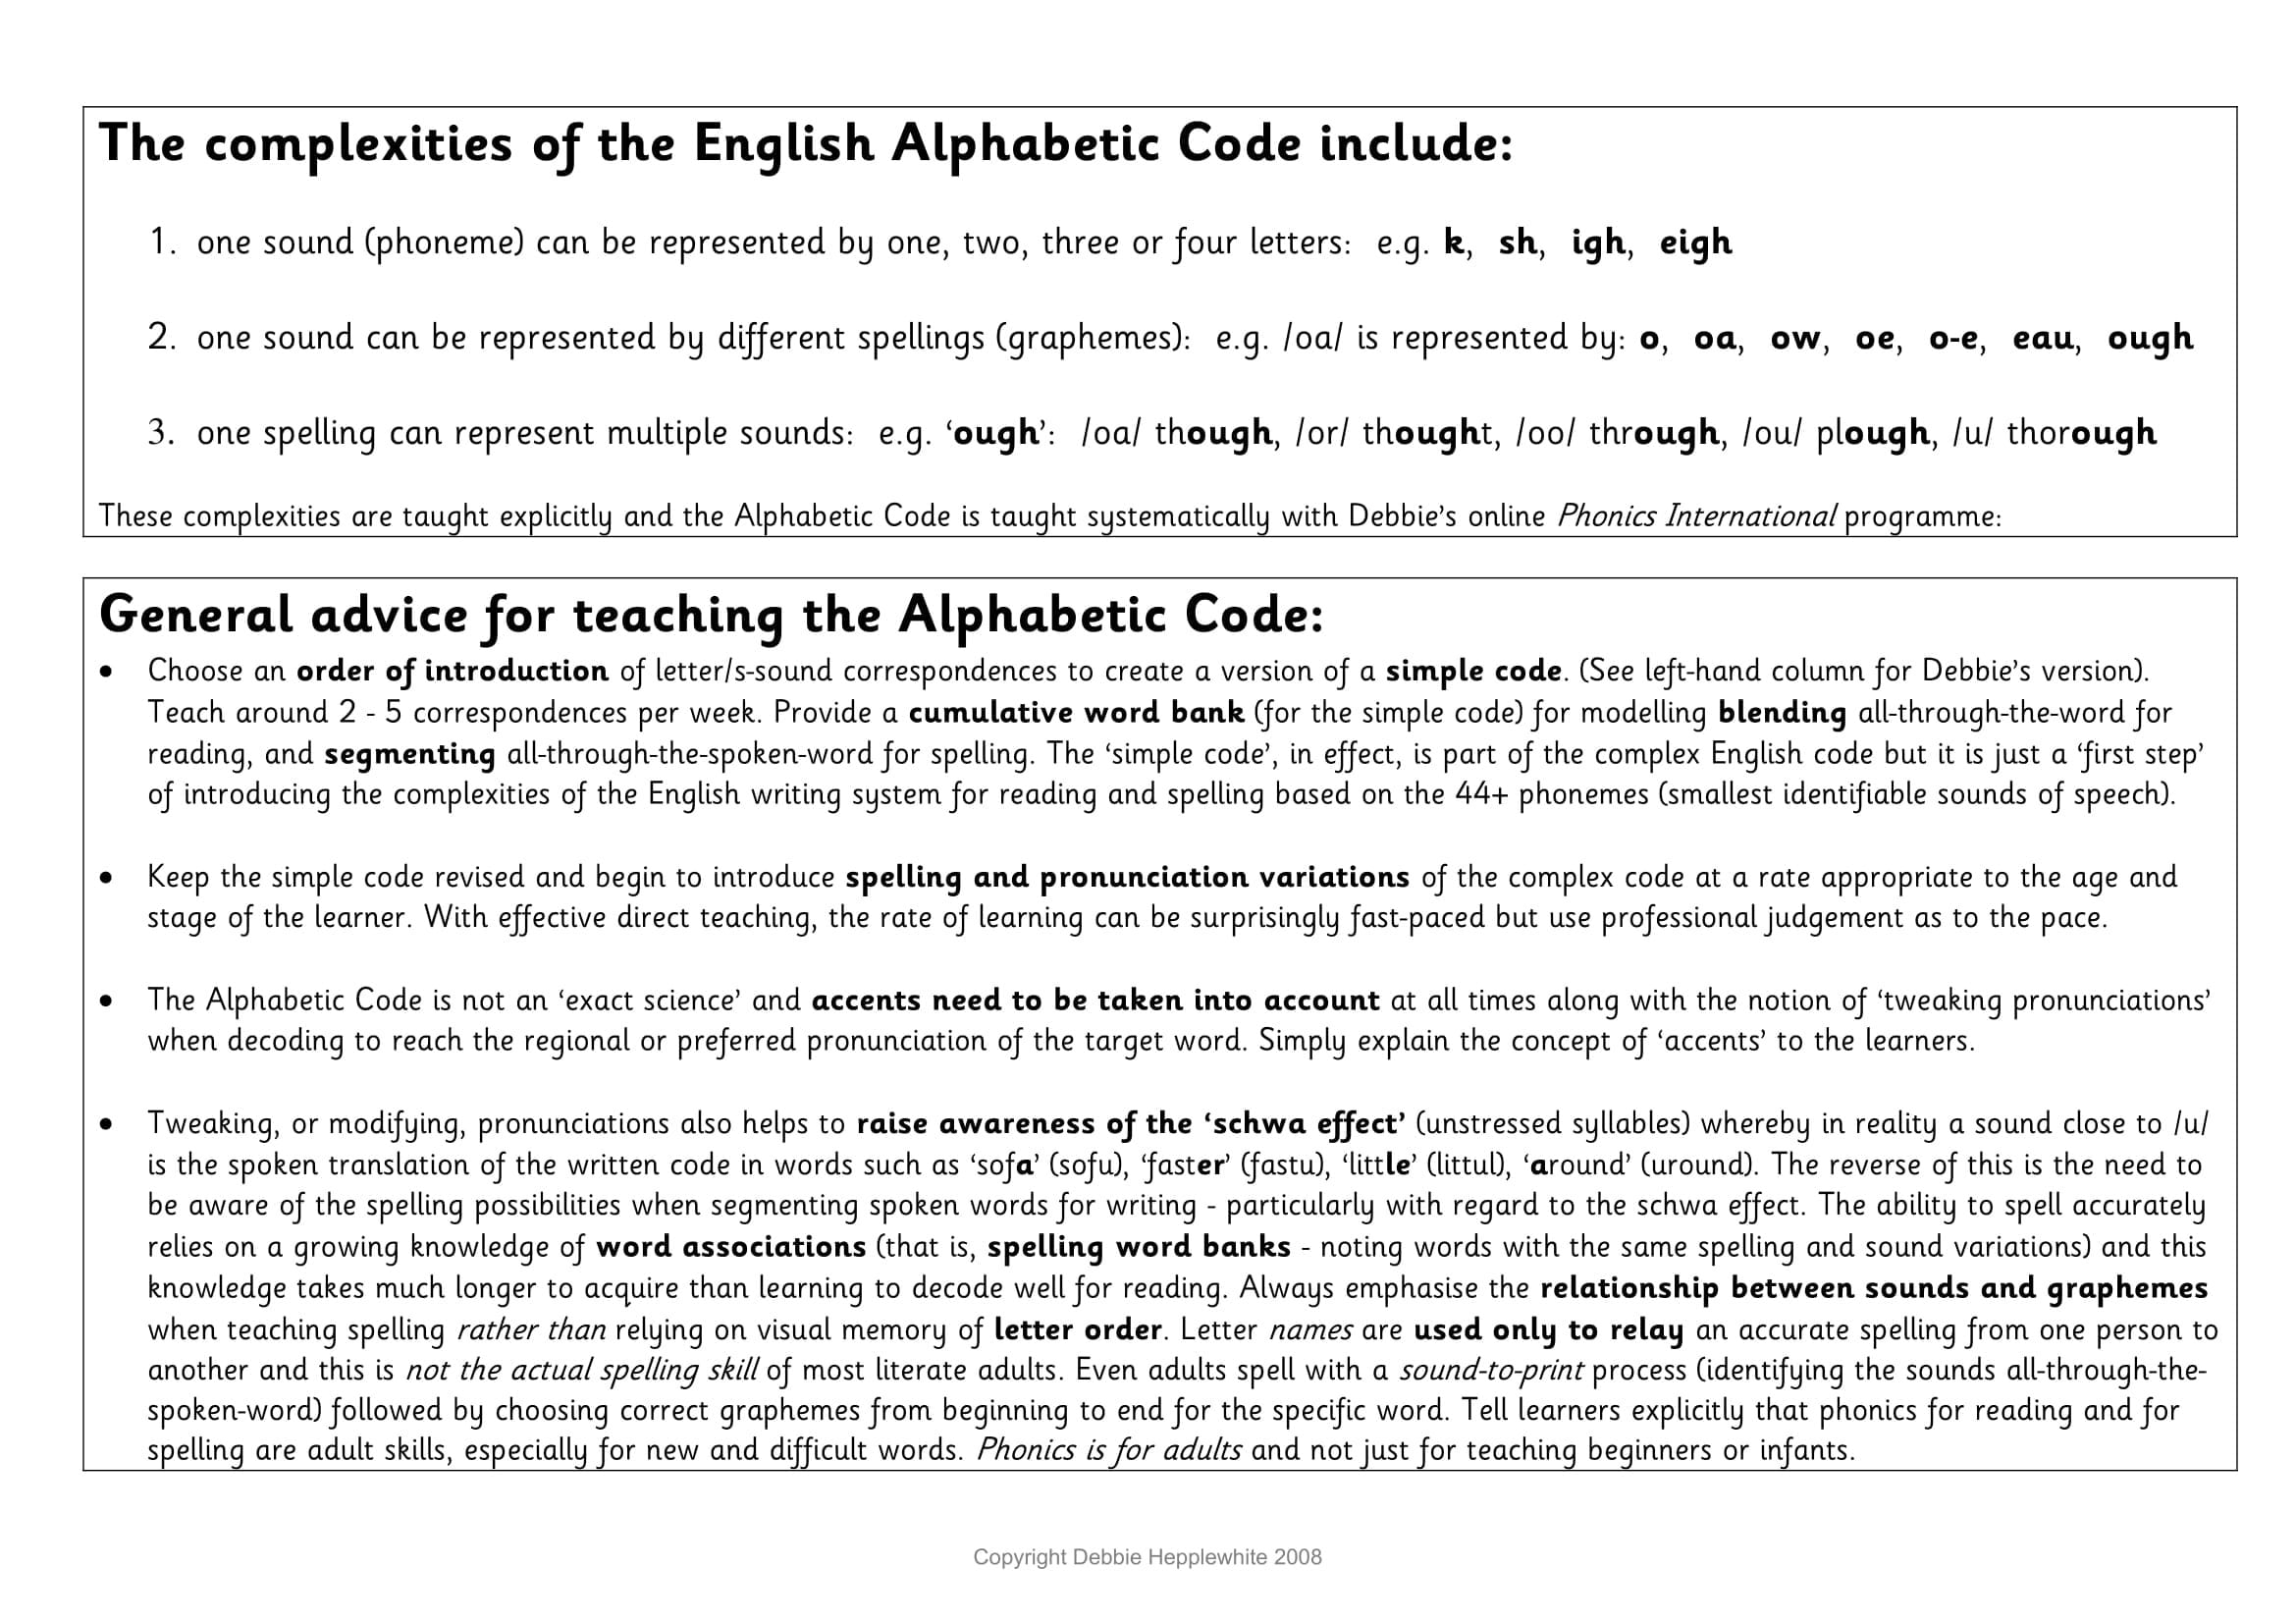 B1_DH-Alph-Code-overview-with-teaching-points-colour-7